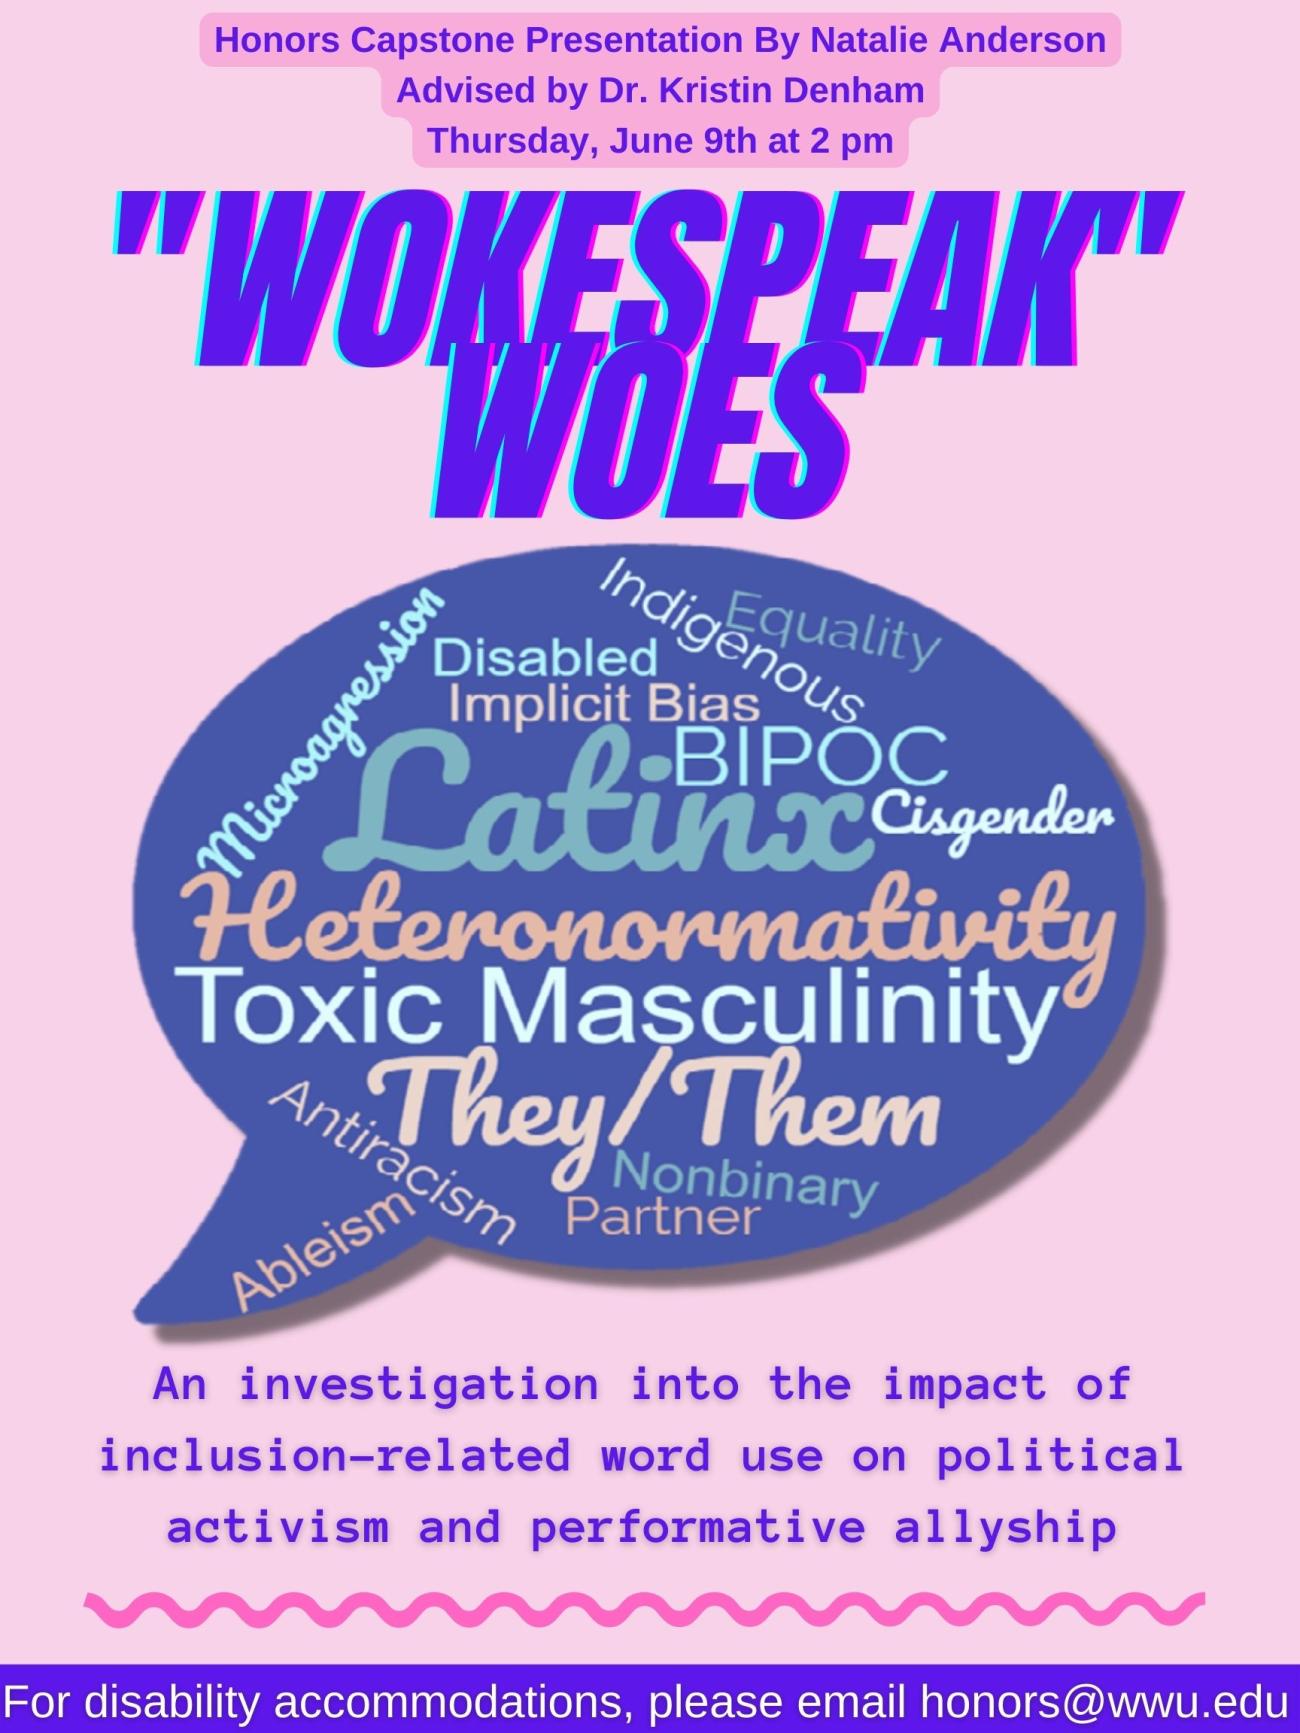 Pink background with image of a blue speech bubble filled with “politically correct” words such as: Microaggression, Disabled, Implicit Bias, Indigenous, Equality, BIPOC, Latinx, Cisgender, etc. Text reads “’Wokespeak’ Woes: An investigation into the impact of inclusion-related word use on political activism and performative allyship. Honors Capstone Presentation by Natalie Anderson. Advised by Dr. Kristin Denham. Thursday, June 9th at 2pm. For disability accommodations, please email honors@wwu.edu."